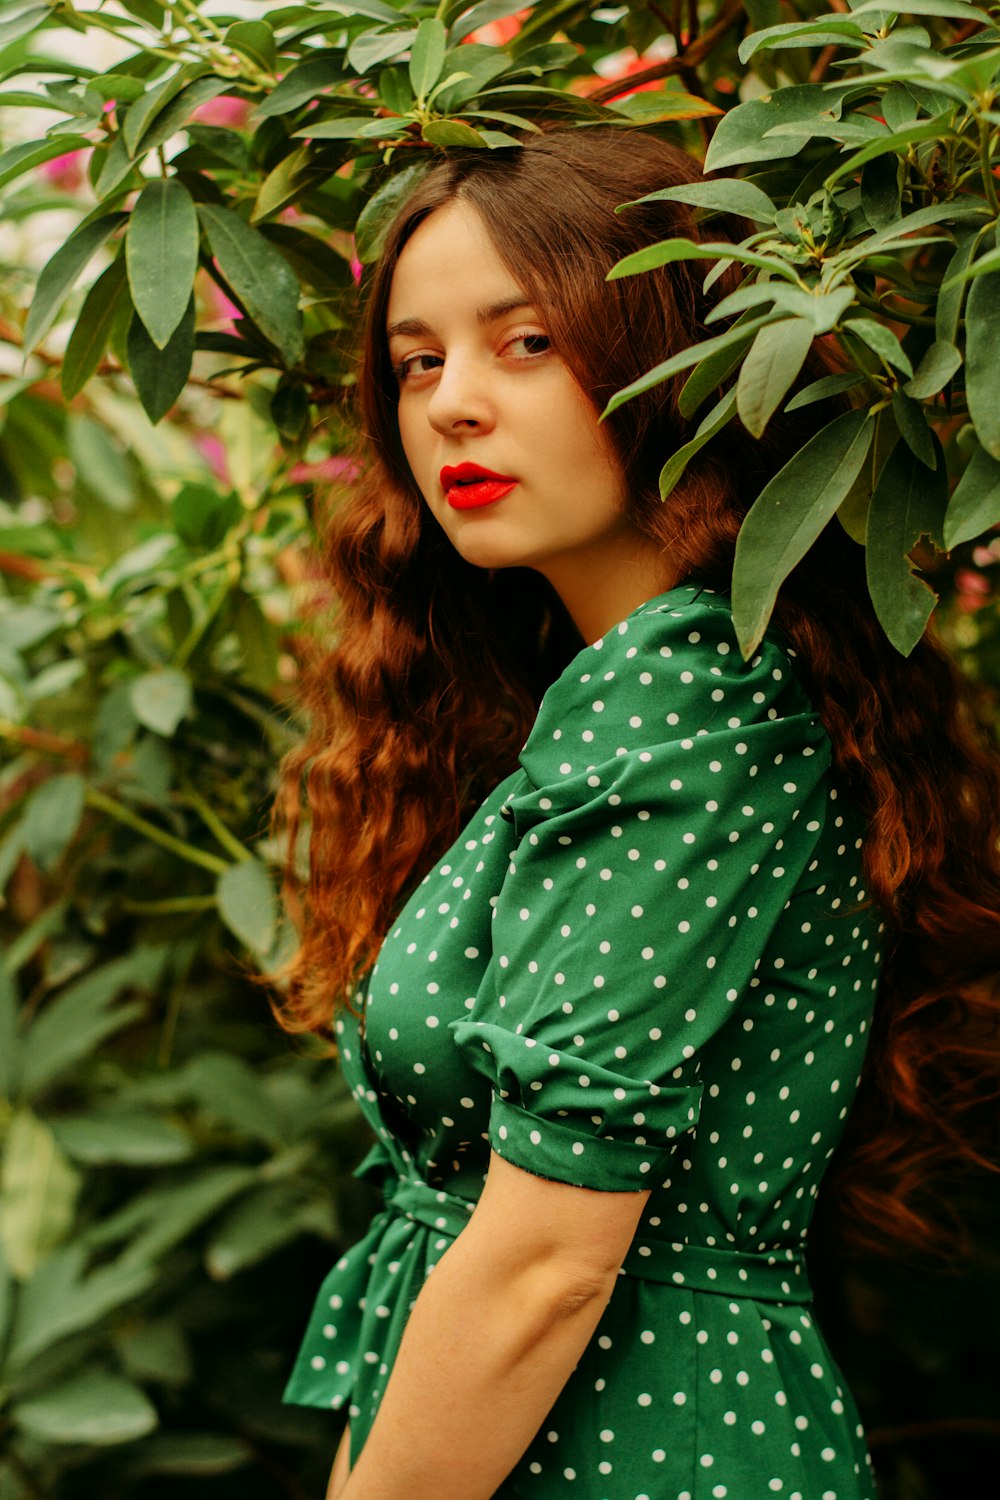 woman in green and black polka dot long sleeve shirt standing beside green plant during daytime